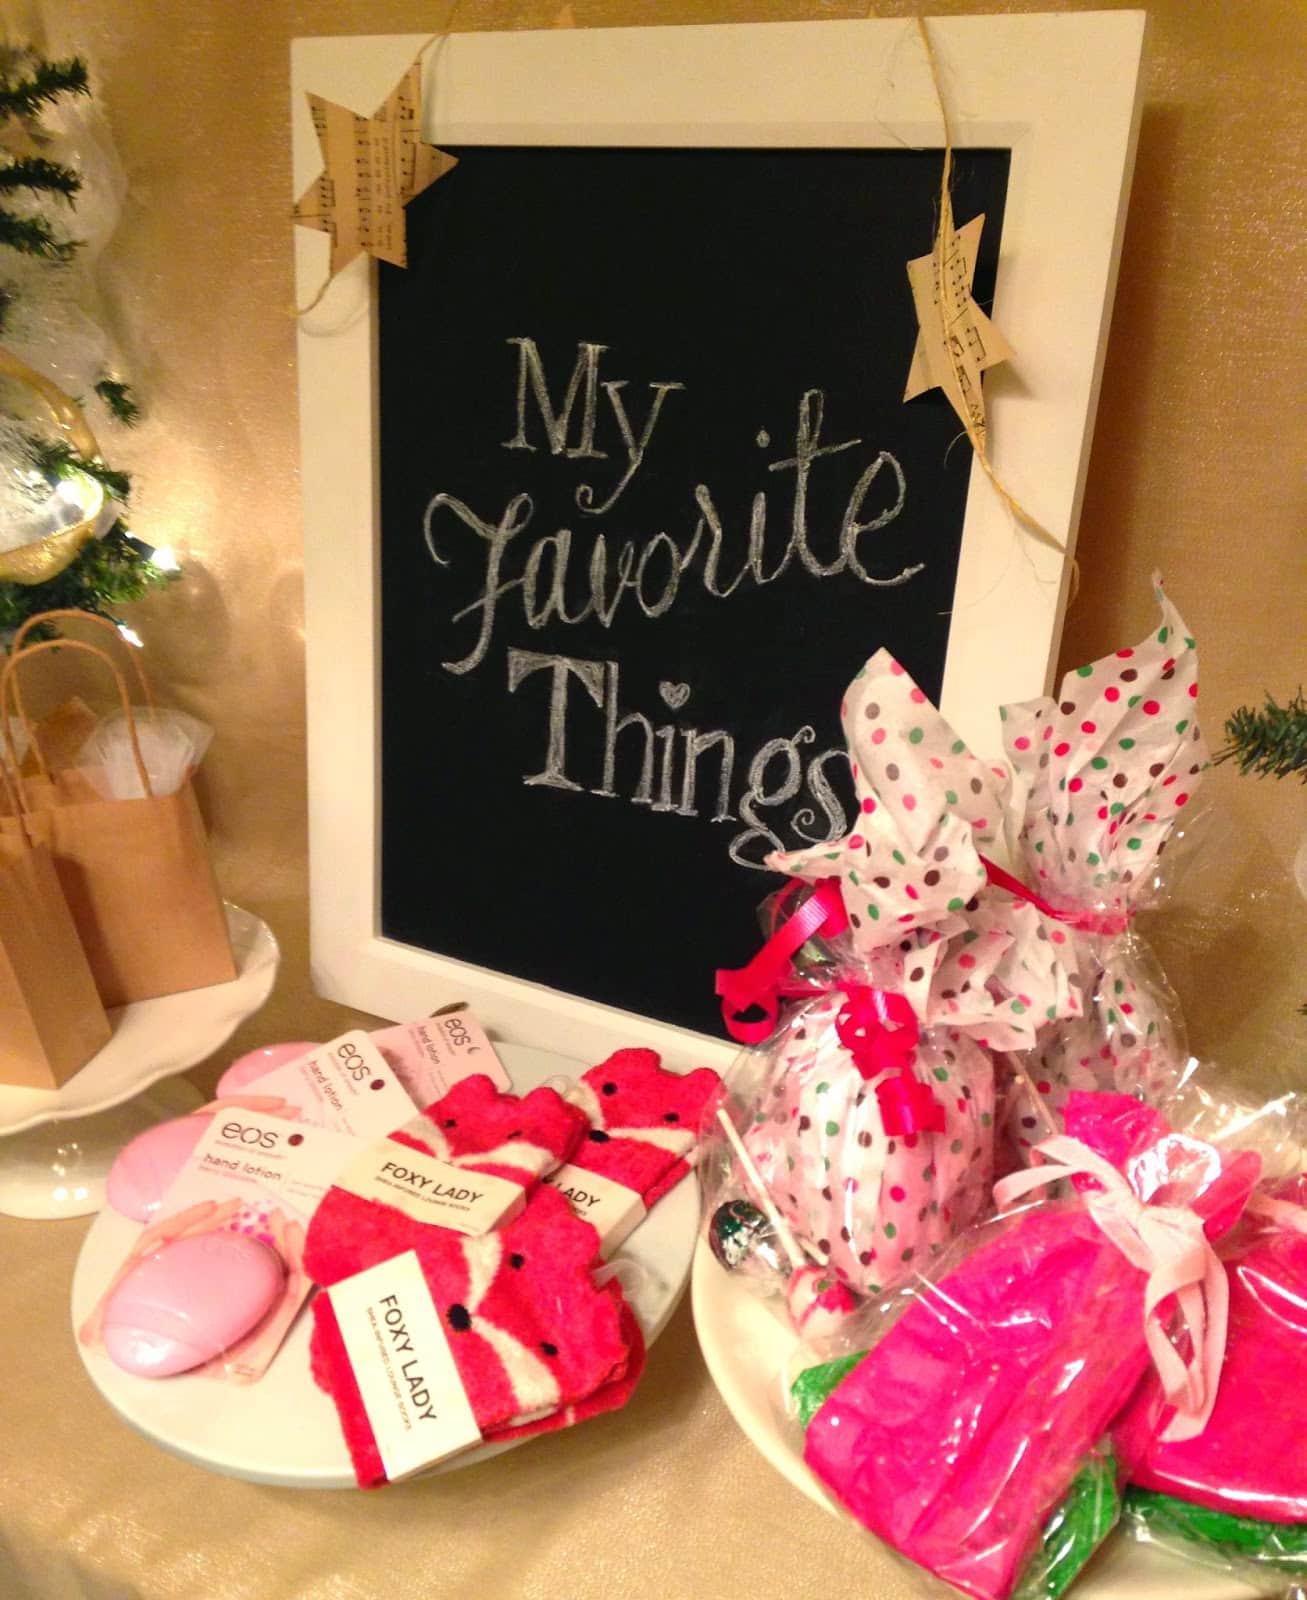 michelle paige blogs: Favorite Things Birthday Party